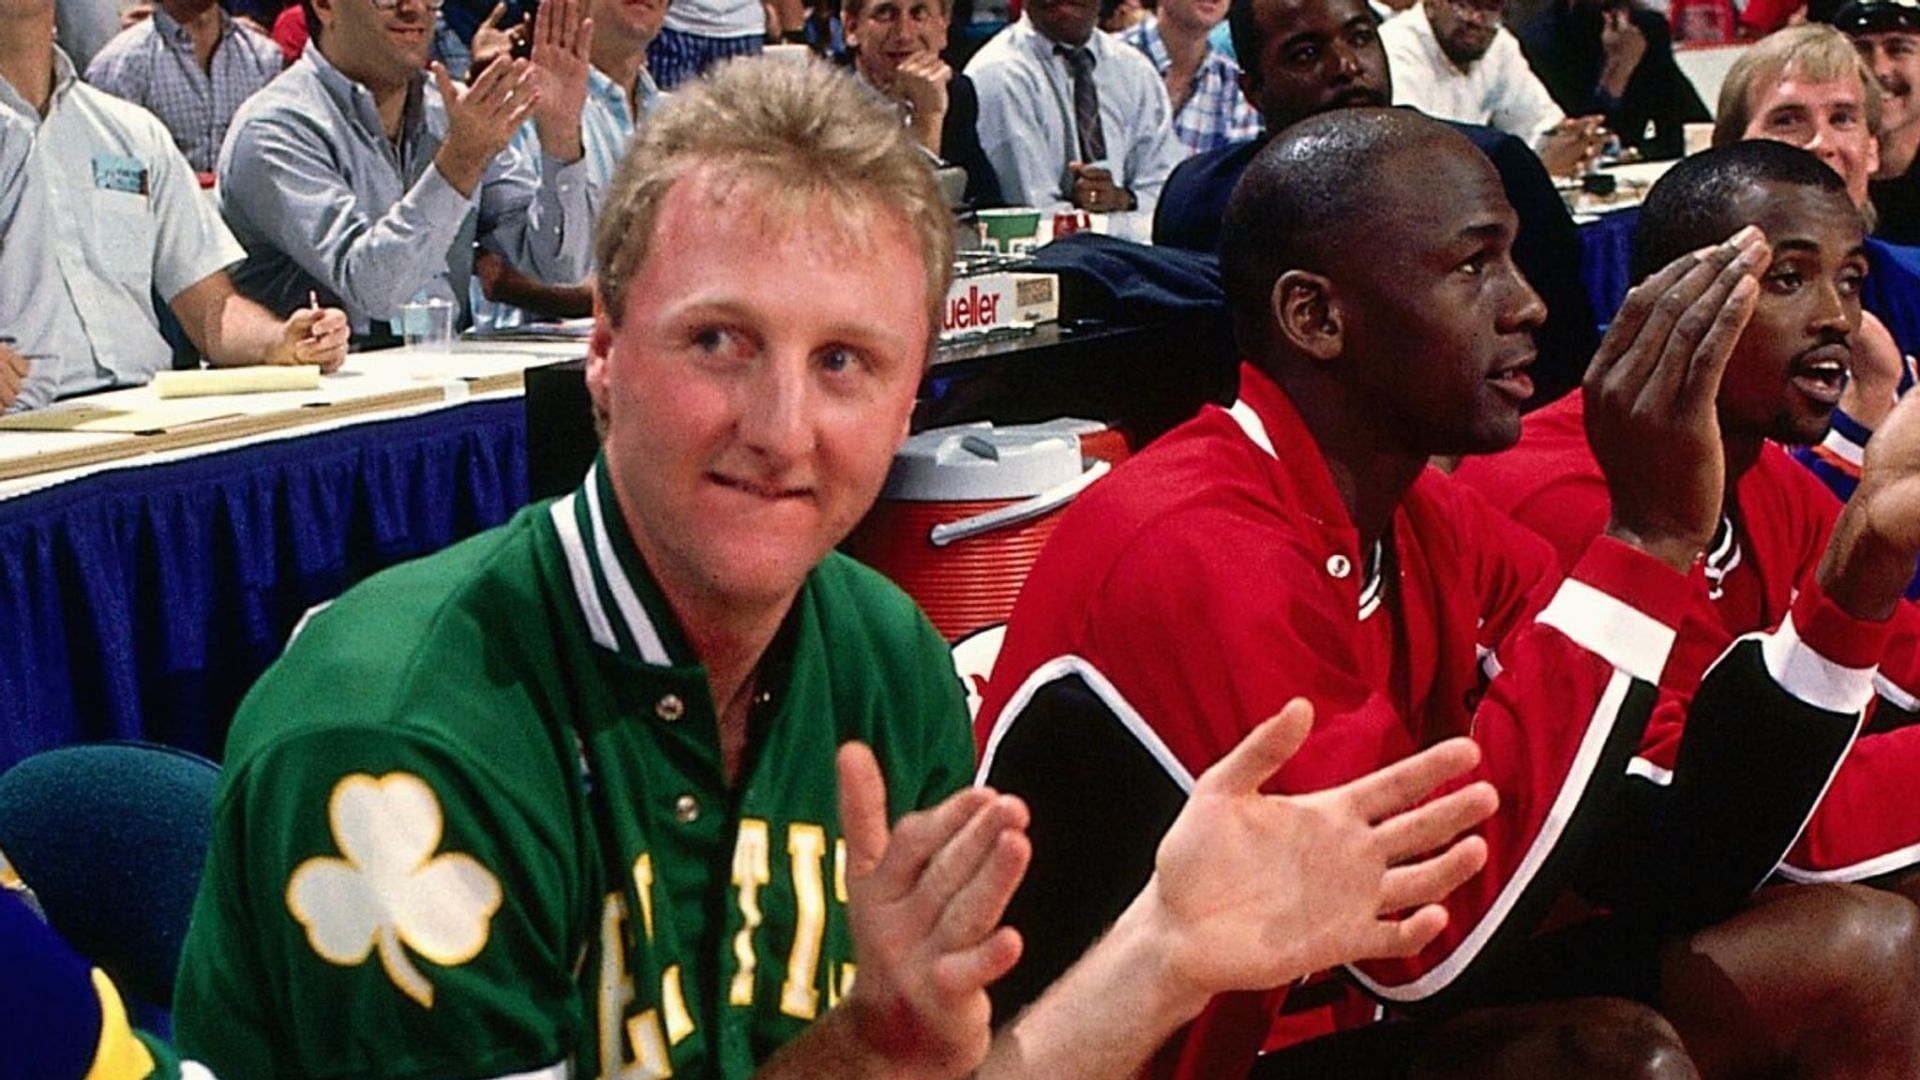 Peak Larry Bird finished in the top 2 in six consecutive MVP votings. [Photo: Sky Sports]